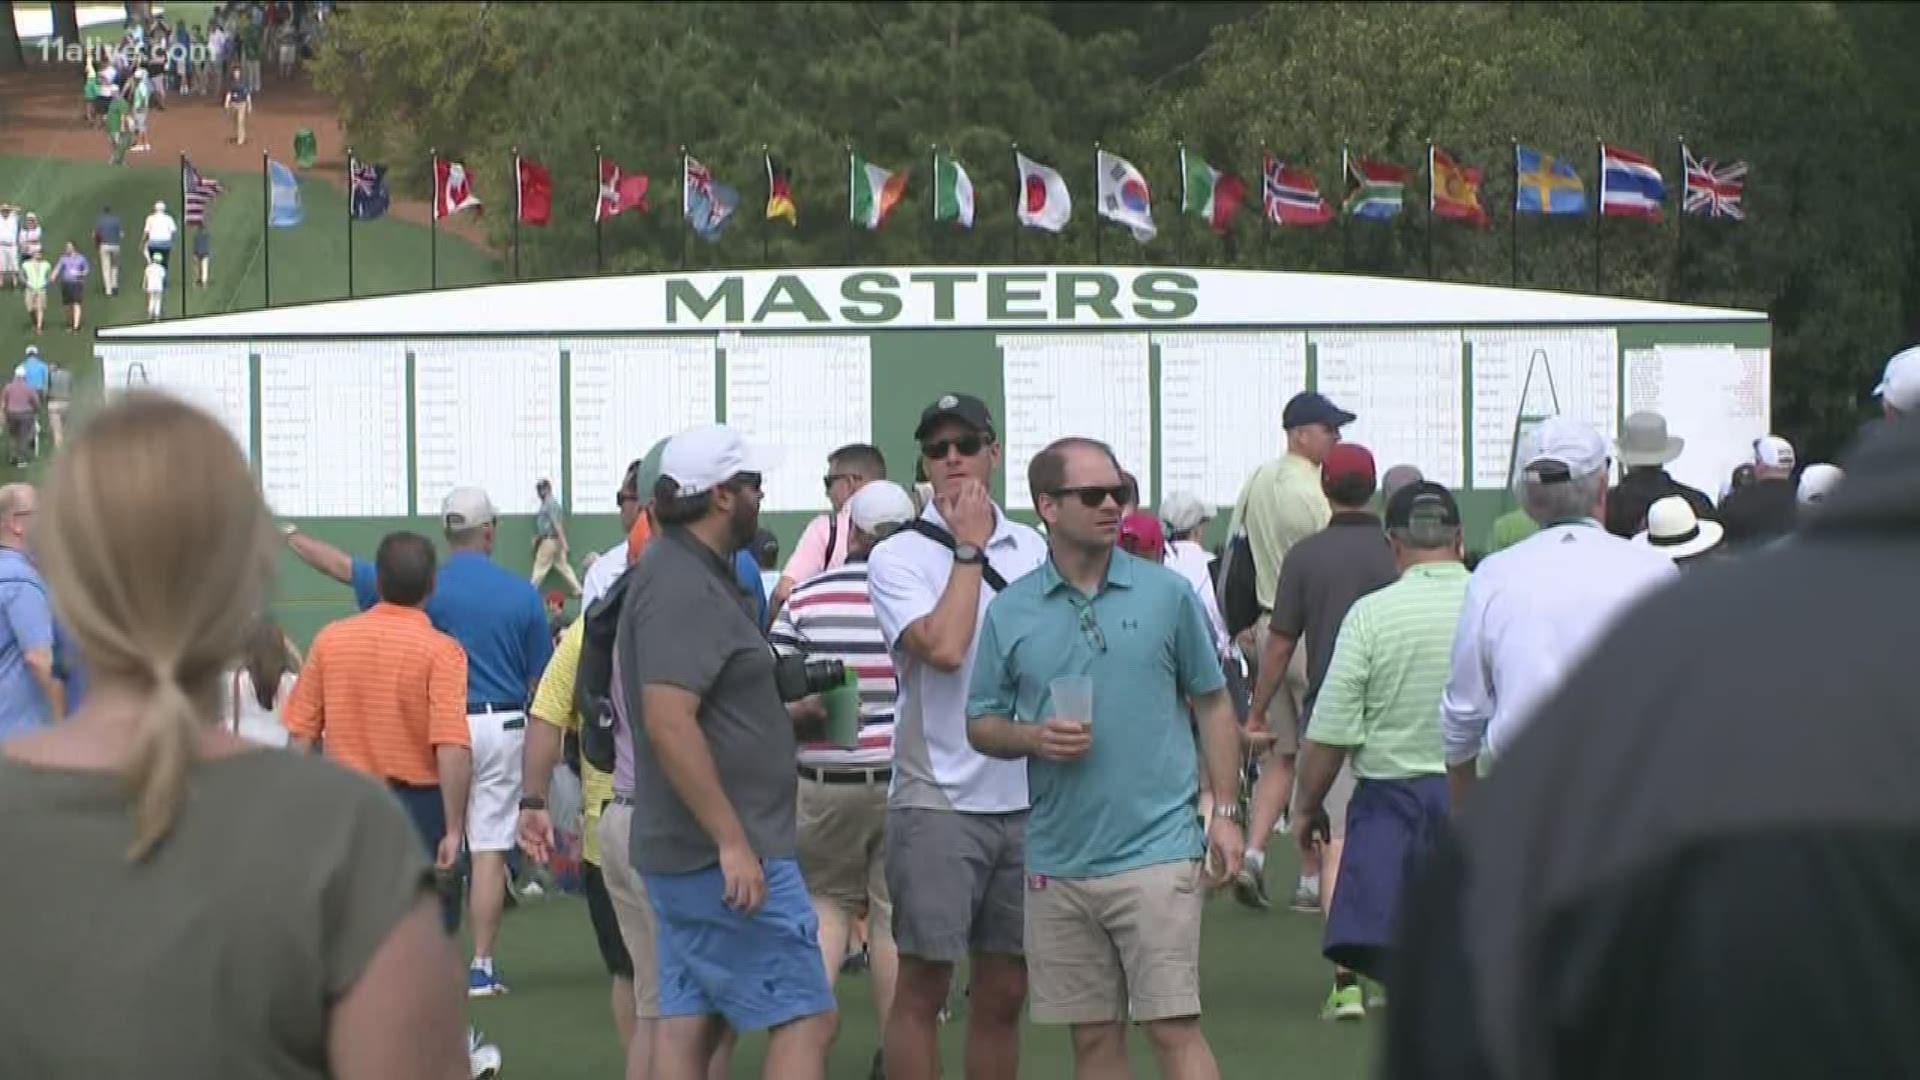 11Alive Sports' Alex Glaze taste-tests his way through the sandwiches of The Masters.